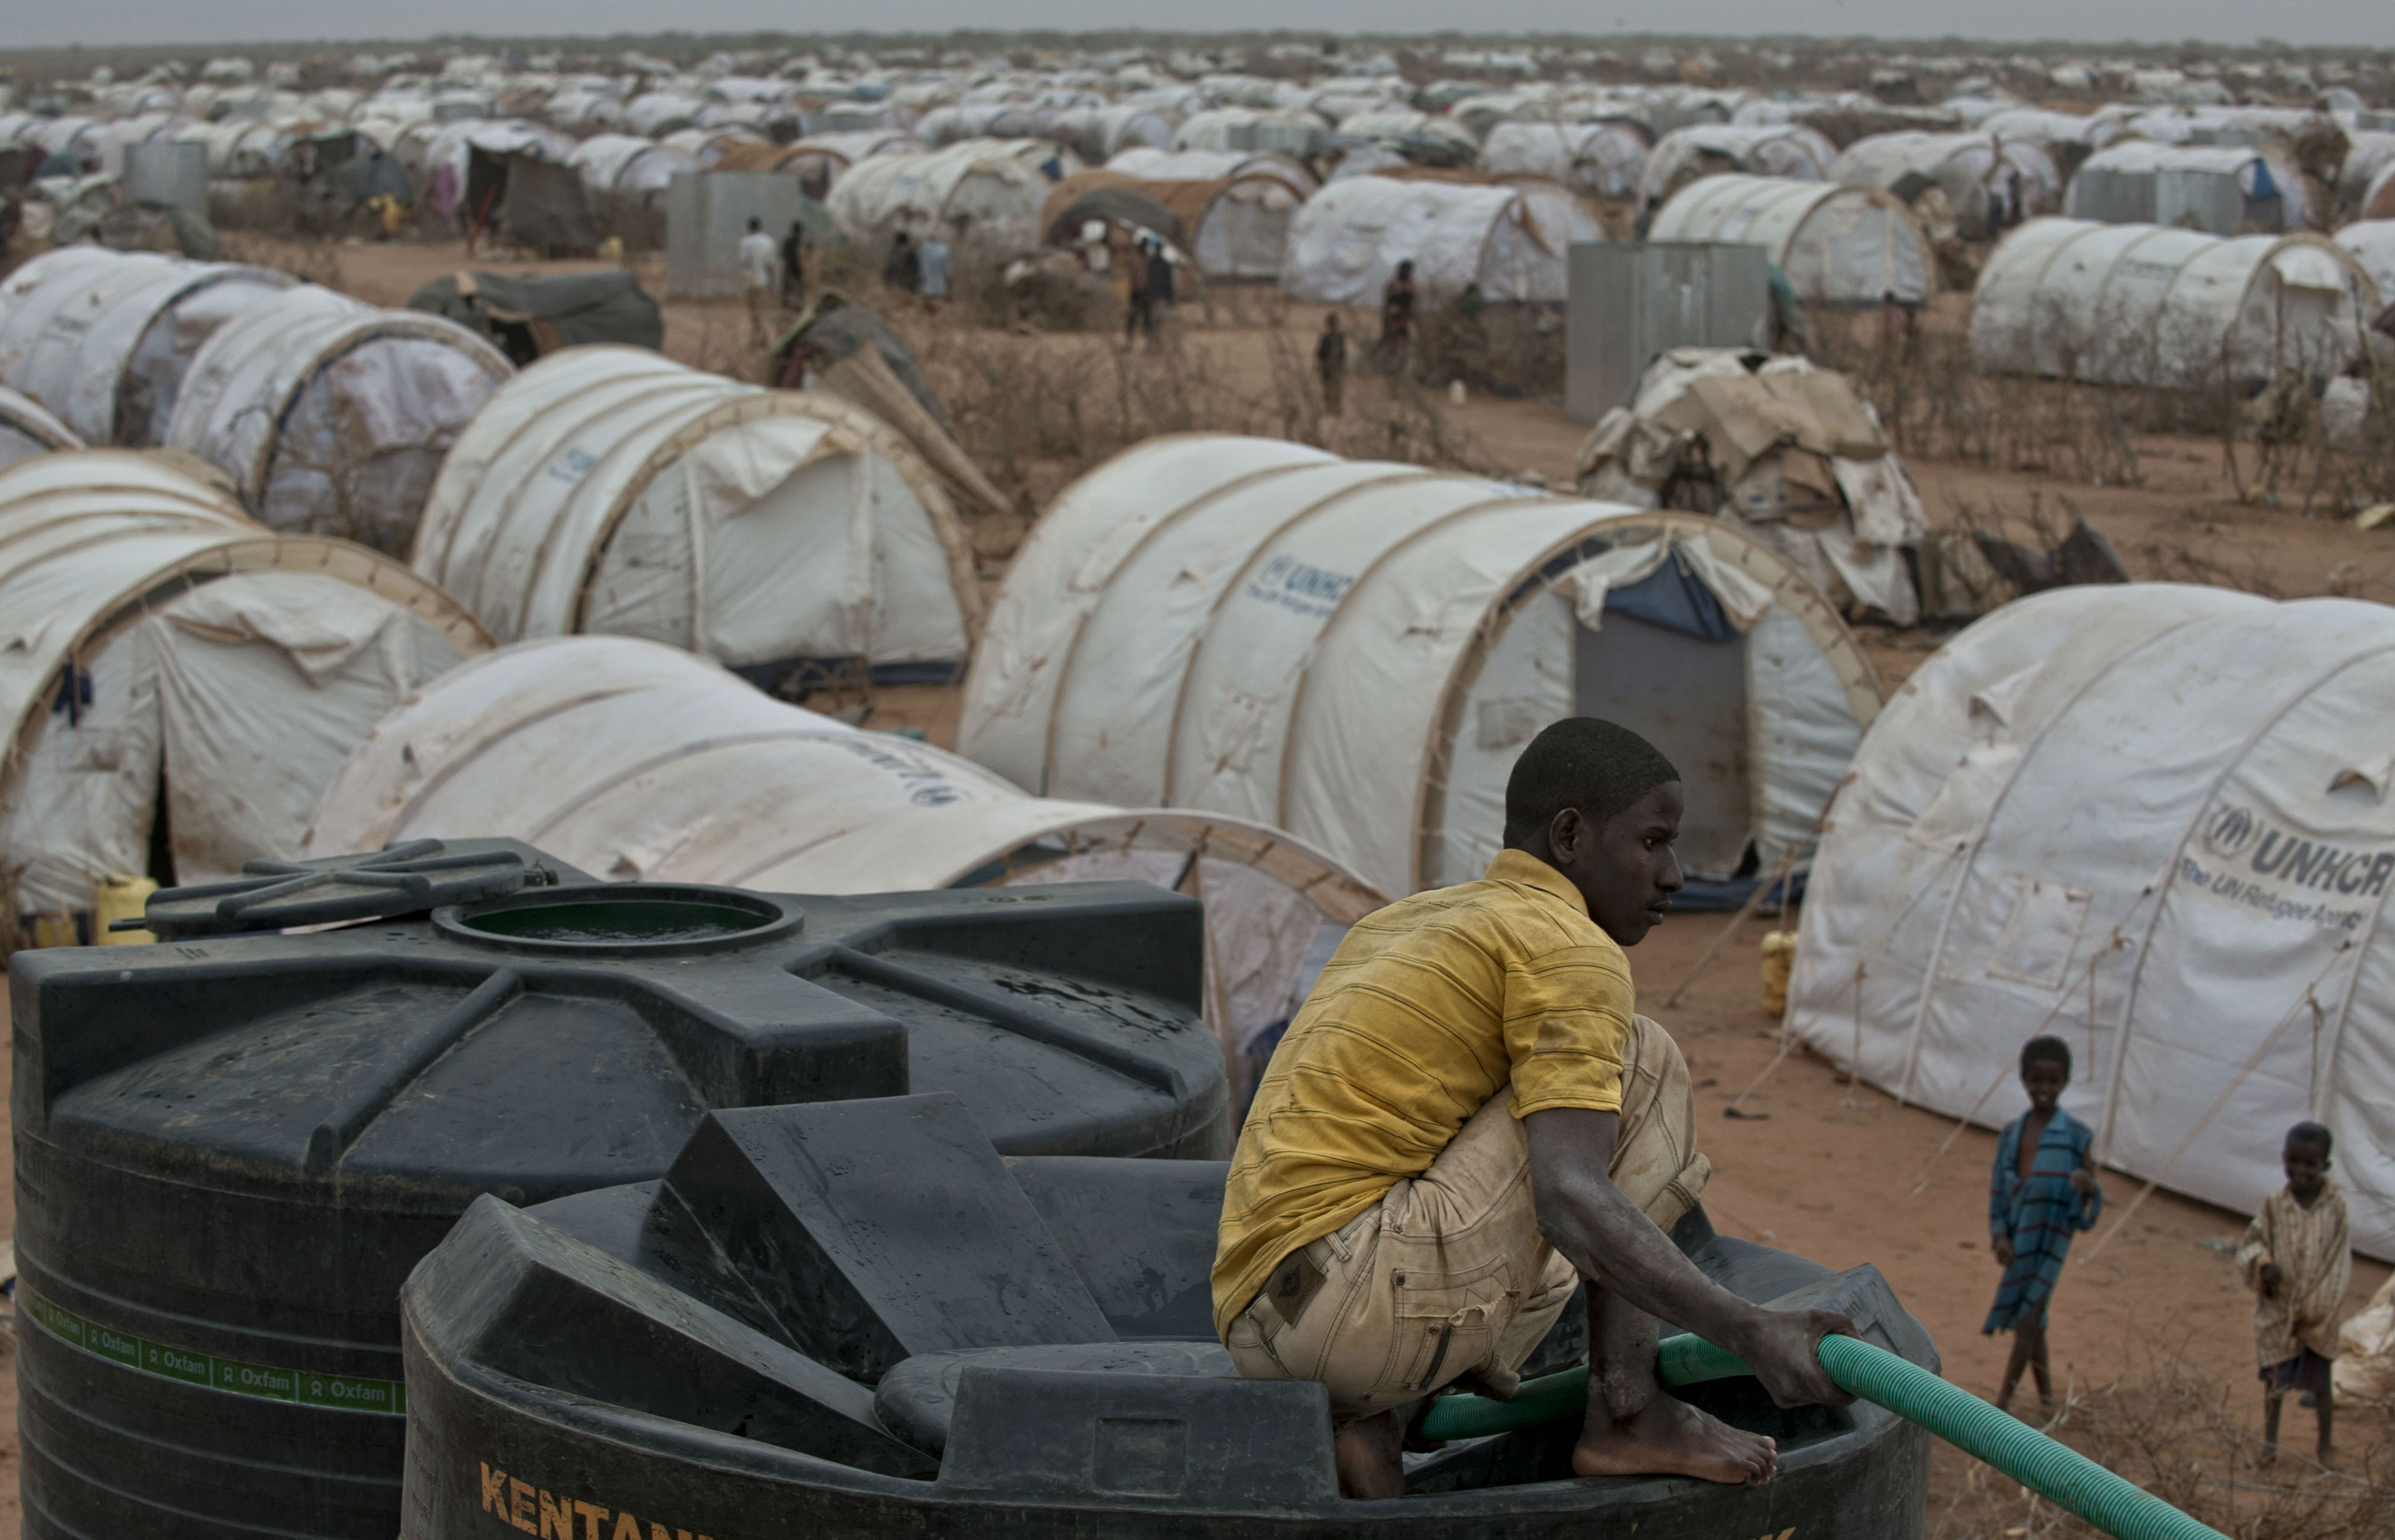 'Very little change' for quarter of a million refugees housed at Dadaab camp, says bishop 